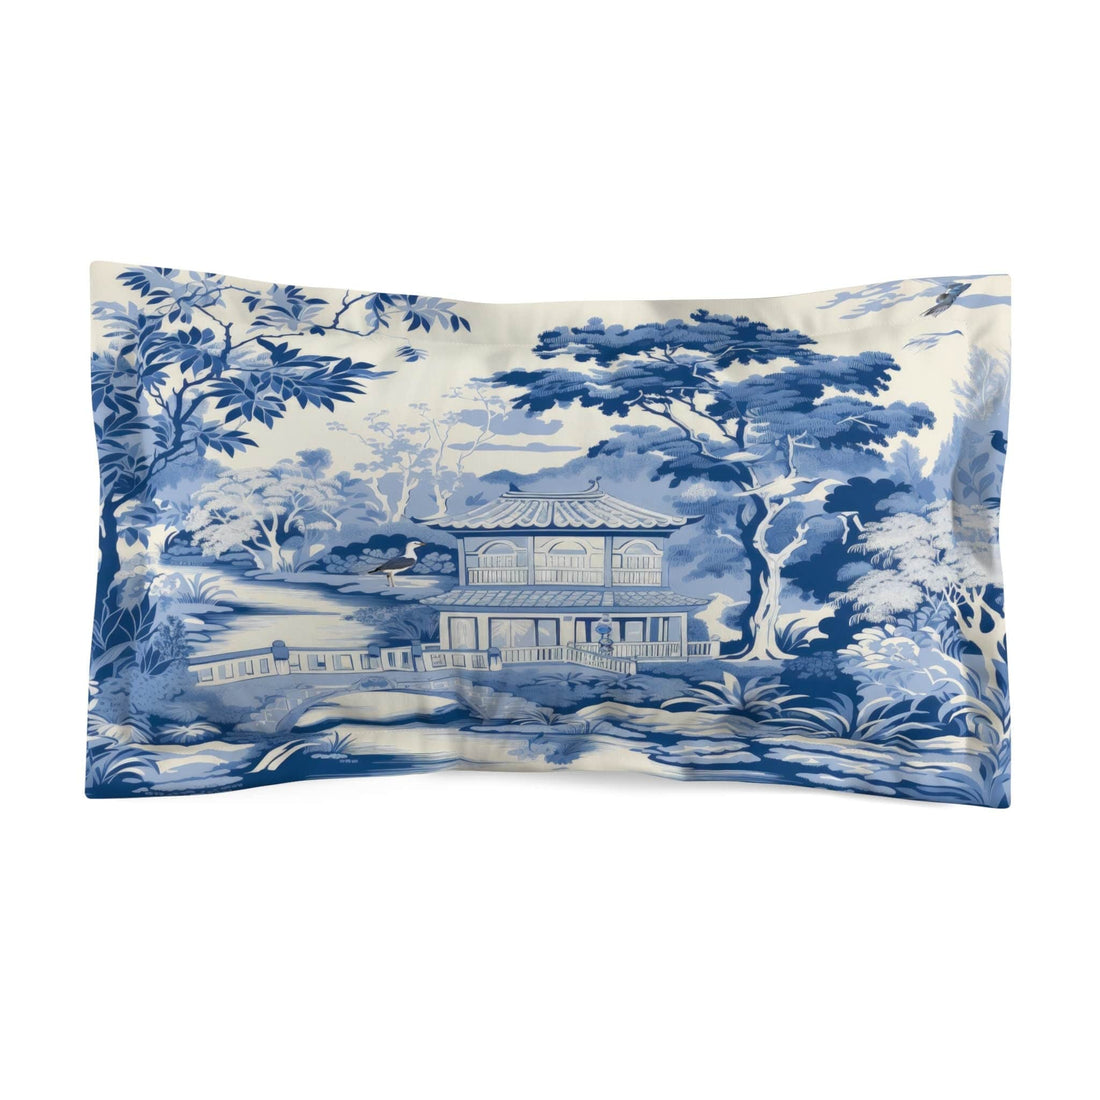 Kate McEnroe New York Chinoiserie Pagoda Floral Pillow Sham, Country Farmhouse Grandmillenial Bedroom Pillow Covers, Rustic Chic Bedroom Decor - 12068823Pillow Shams19450706223681471825